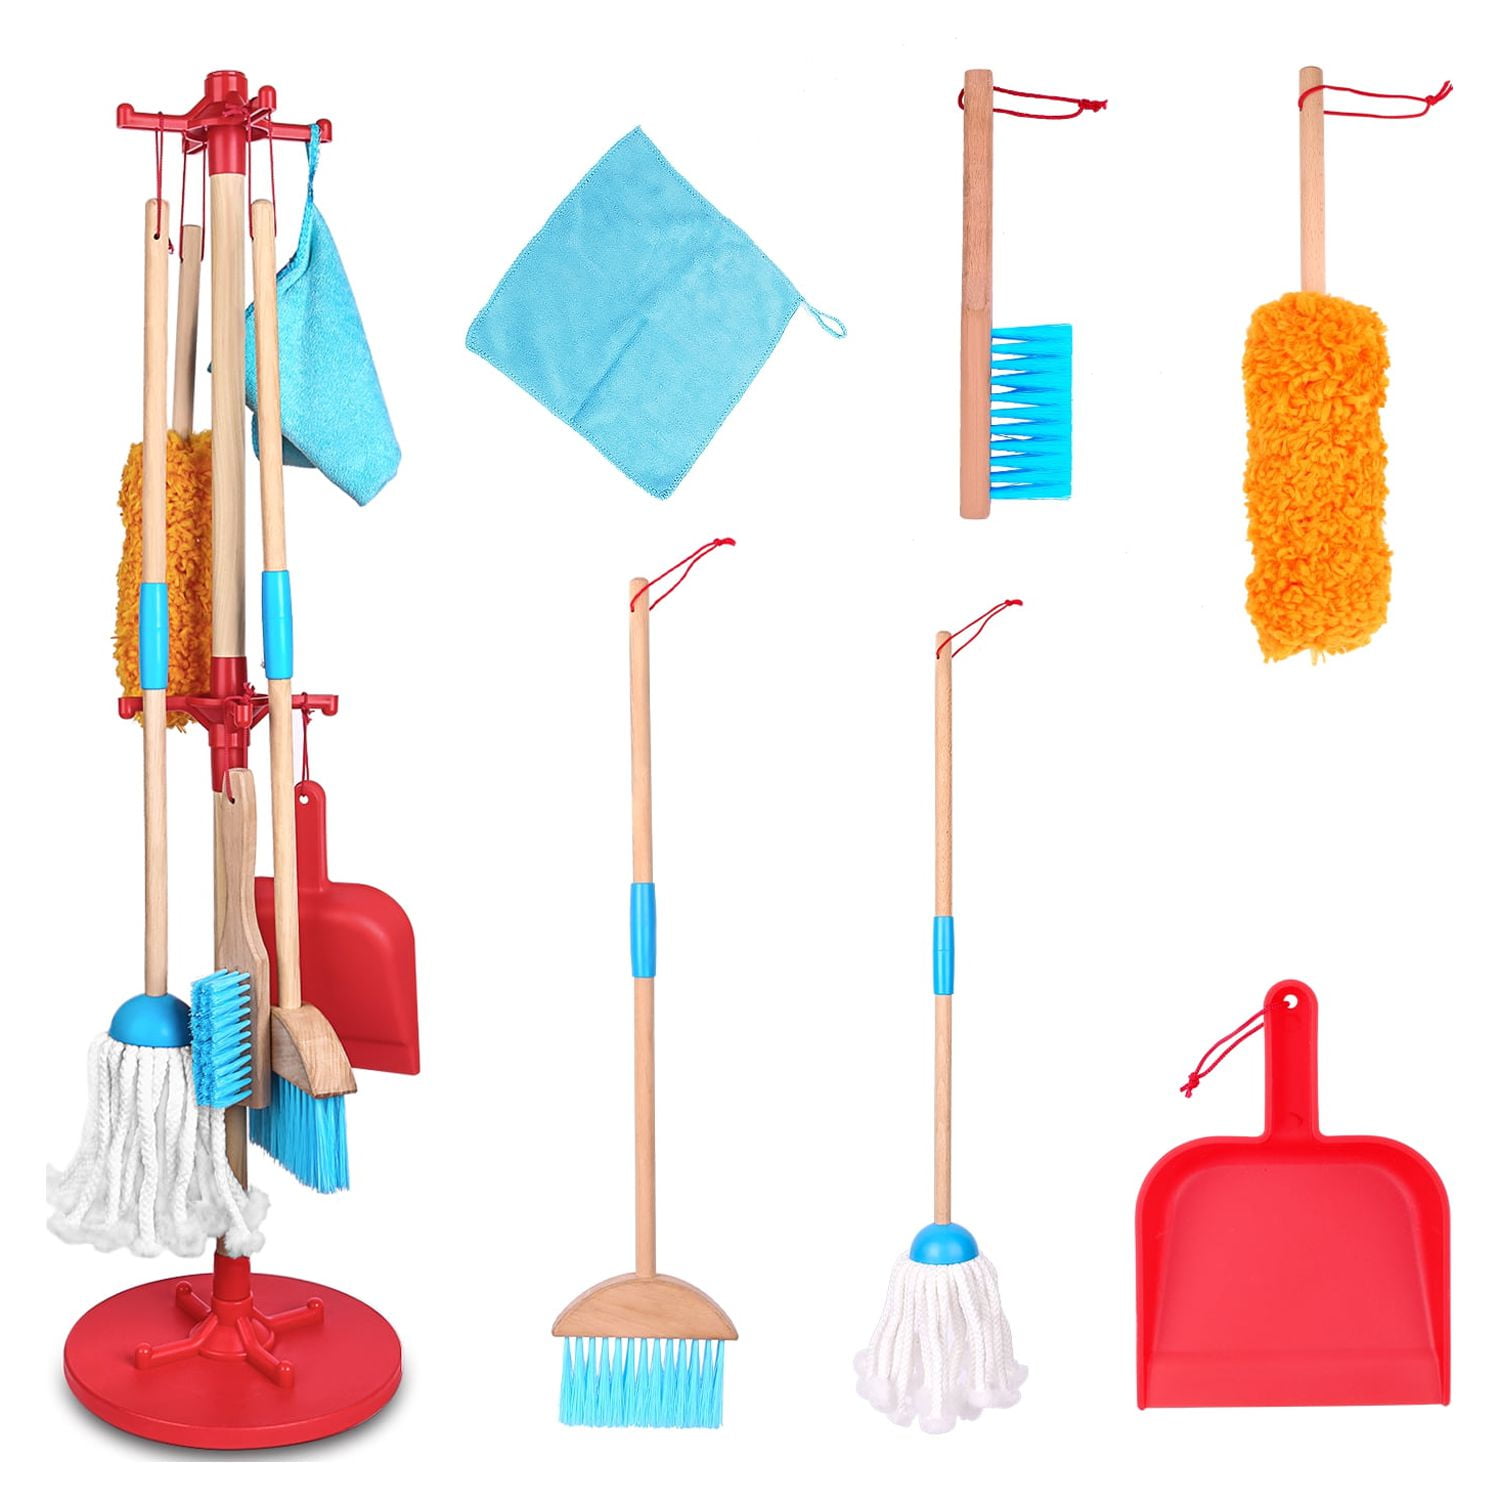 JustForKids Wooden Detachable Kids Cleaning Set - Duster, Brush, Mop, Broom  and Hanging Stand Play - Housekeeping Kit - STEM Toys for Toddlers Girls 